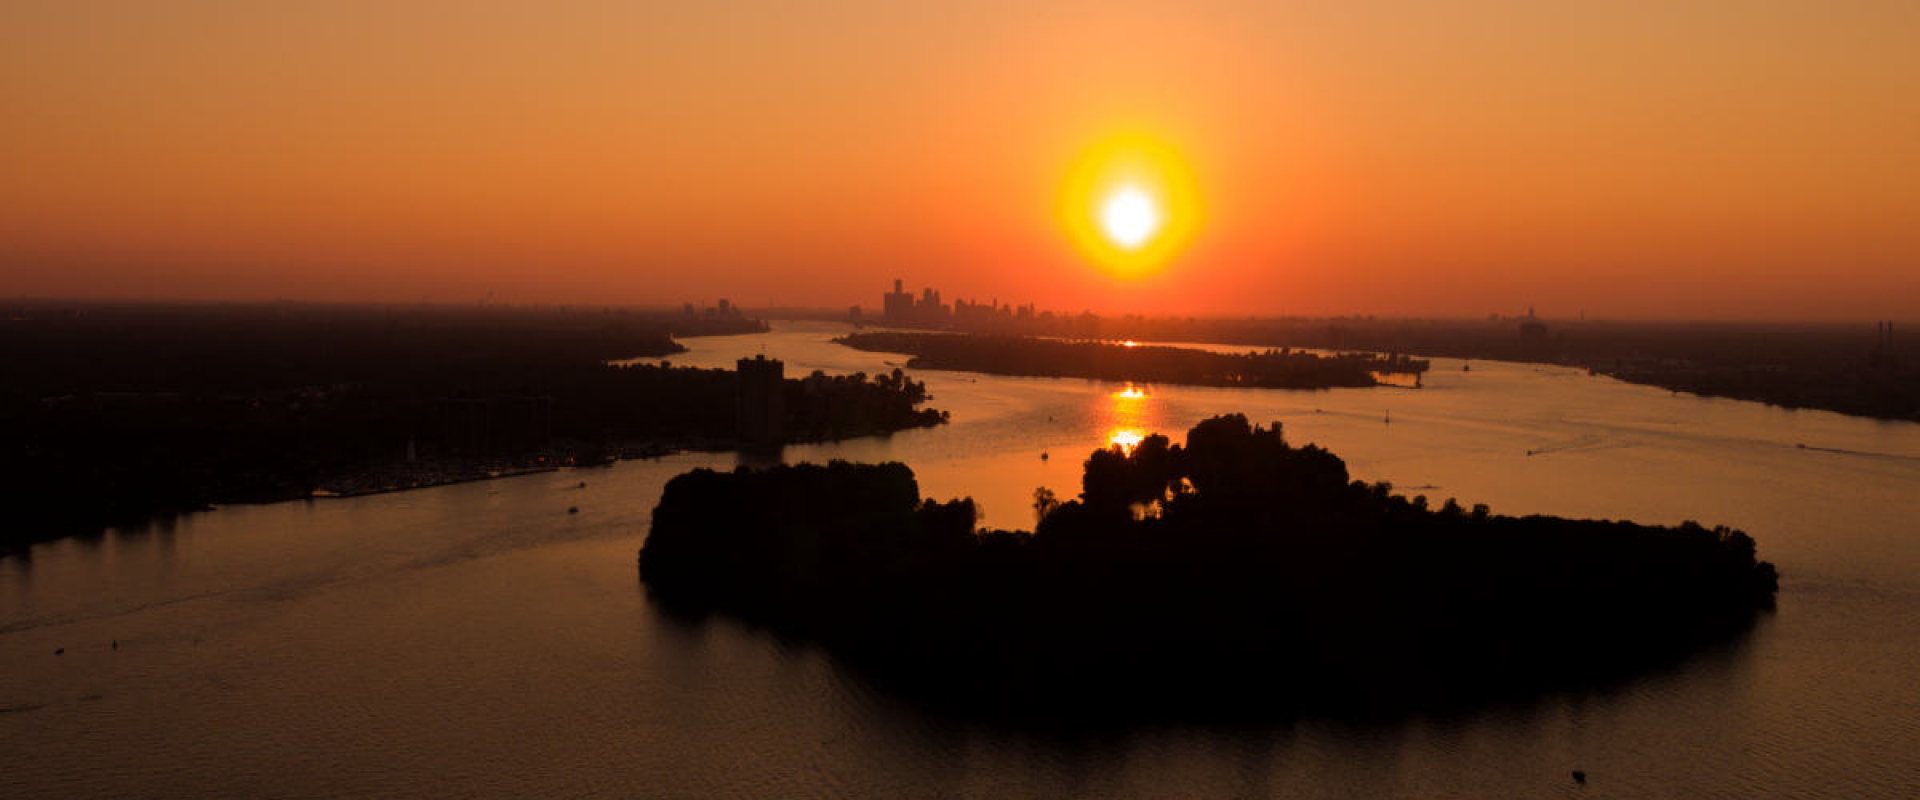 The setting sun casts a bright orange glow over Peche Island and the Detroit River